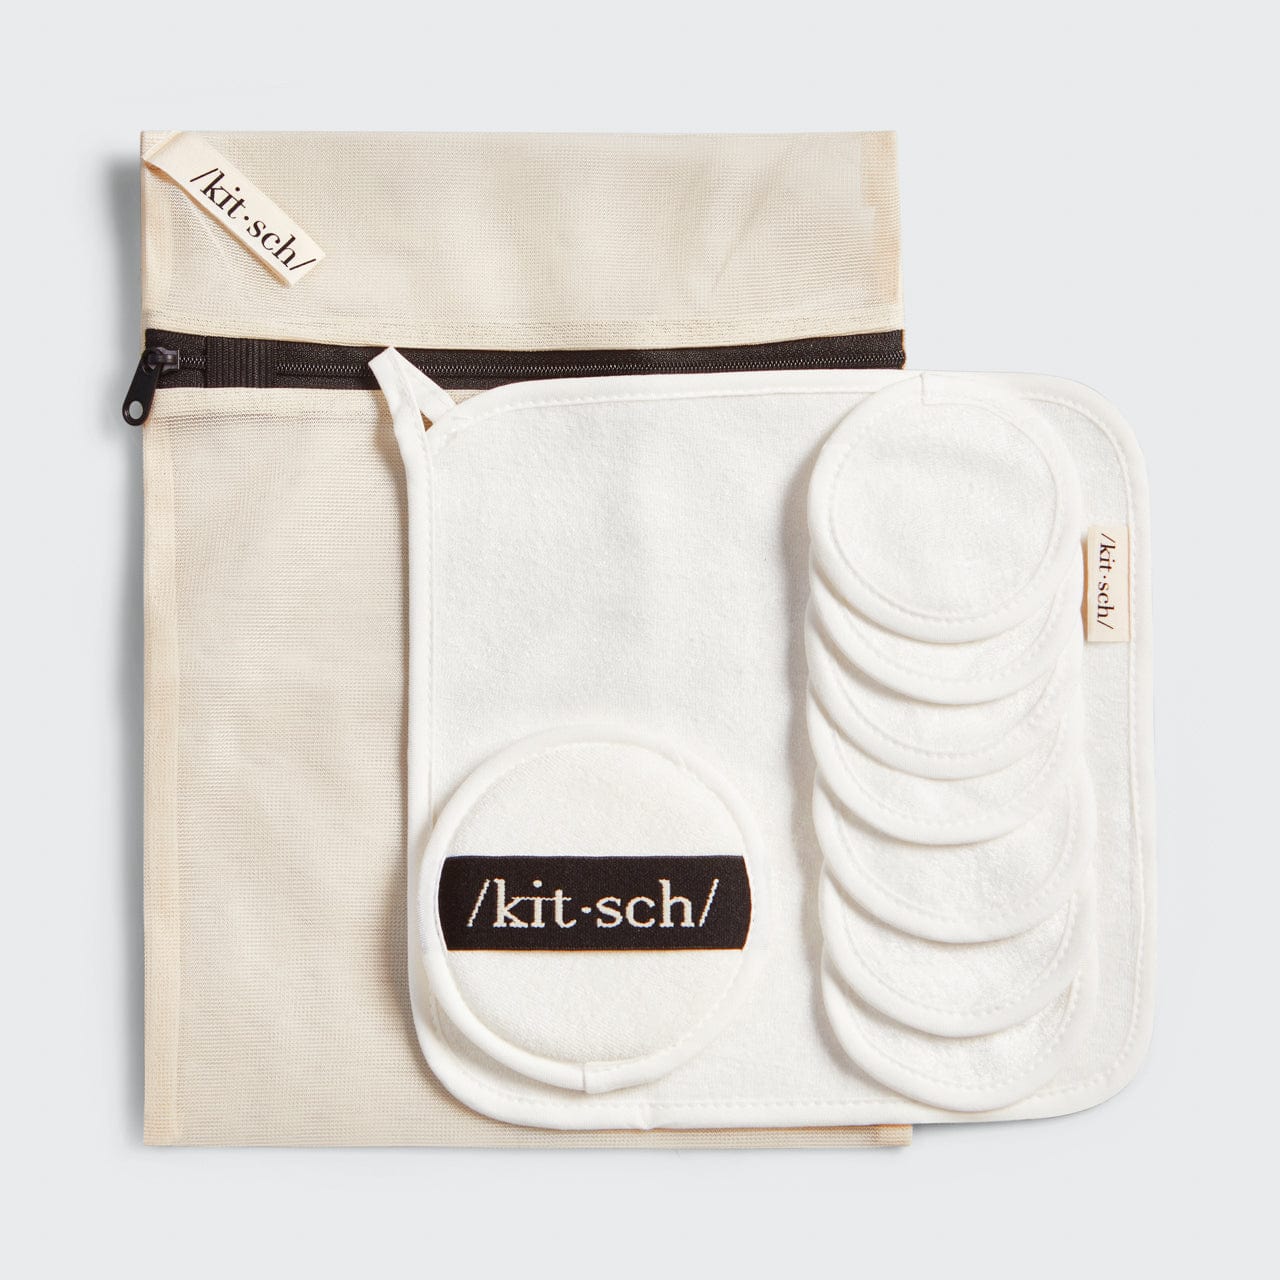 KITSCH: Eco-Friendly Ultimate Cleansing Kit